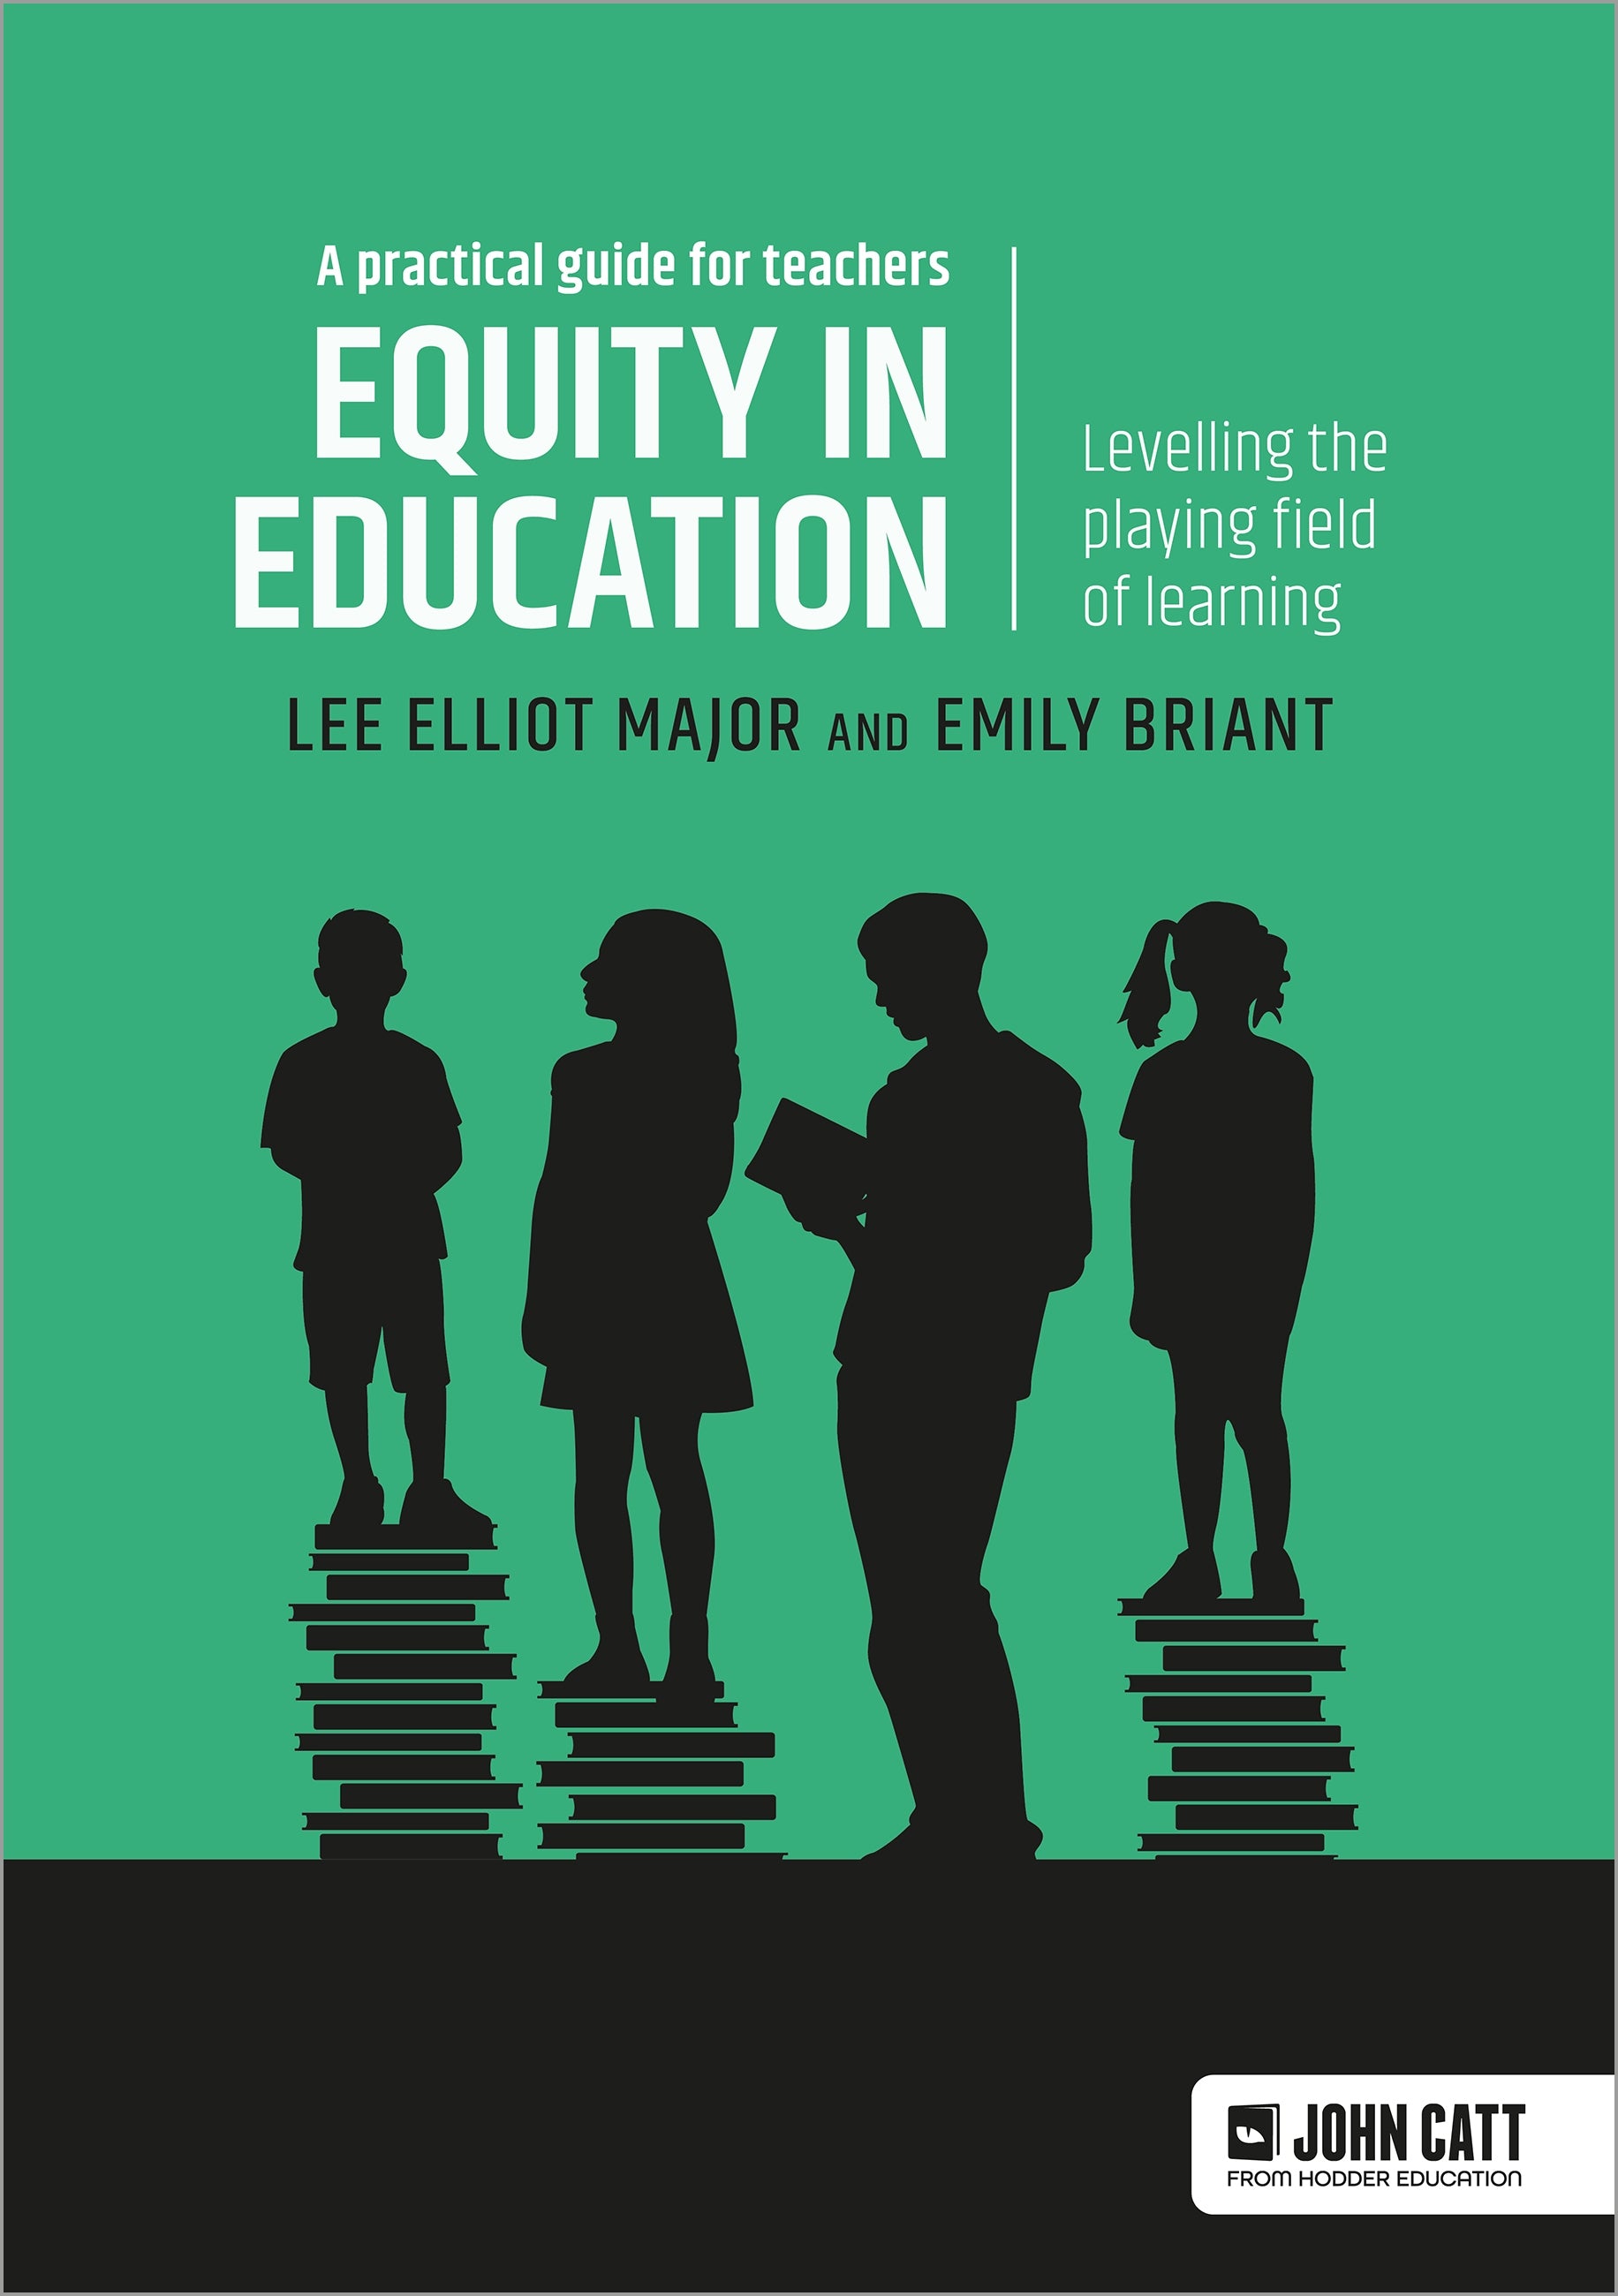 education:　a　Equity　Bookshop　the　–　Catt　learning　playing　in　of　John　pract　UK　Levelling　field